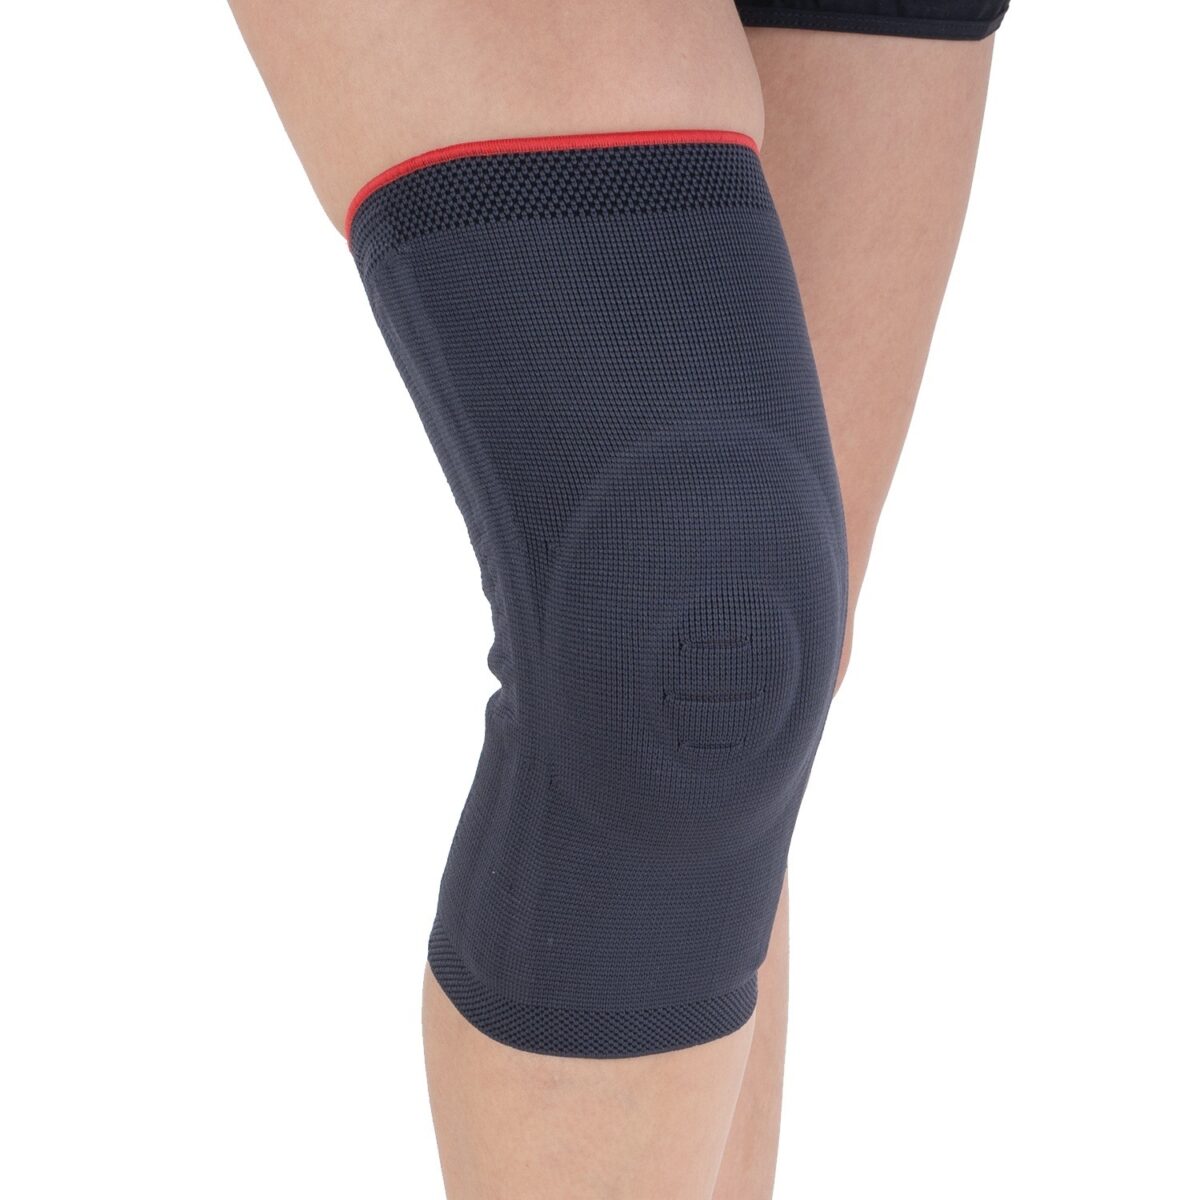 wingmed orthopedic equipments W506 woven patella and ligament knee support 66